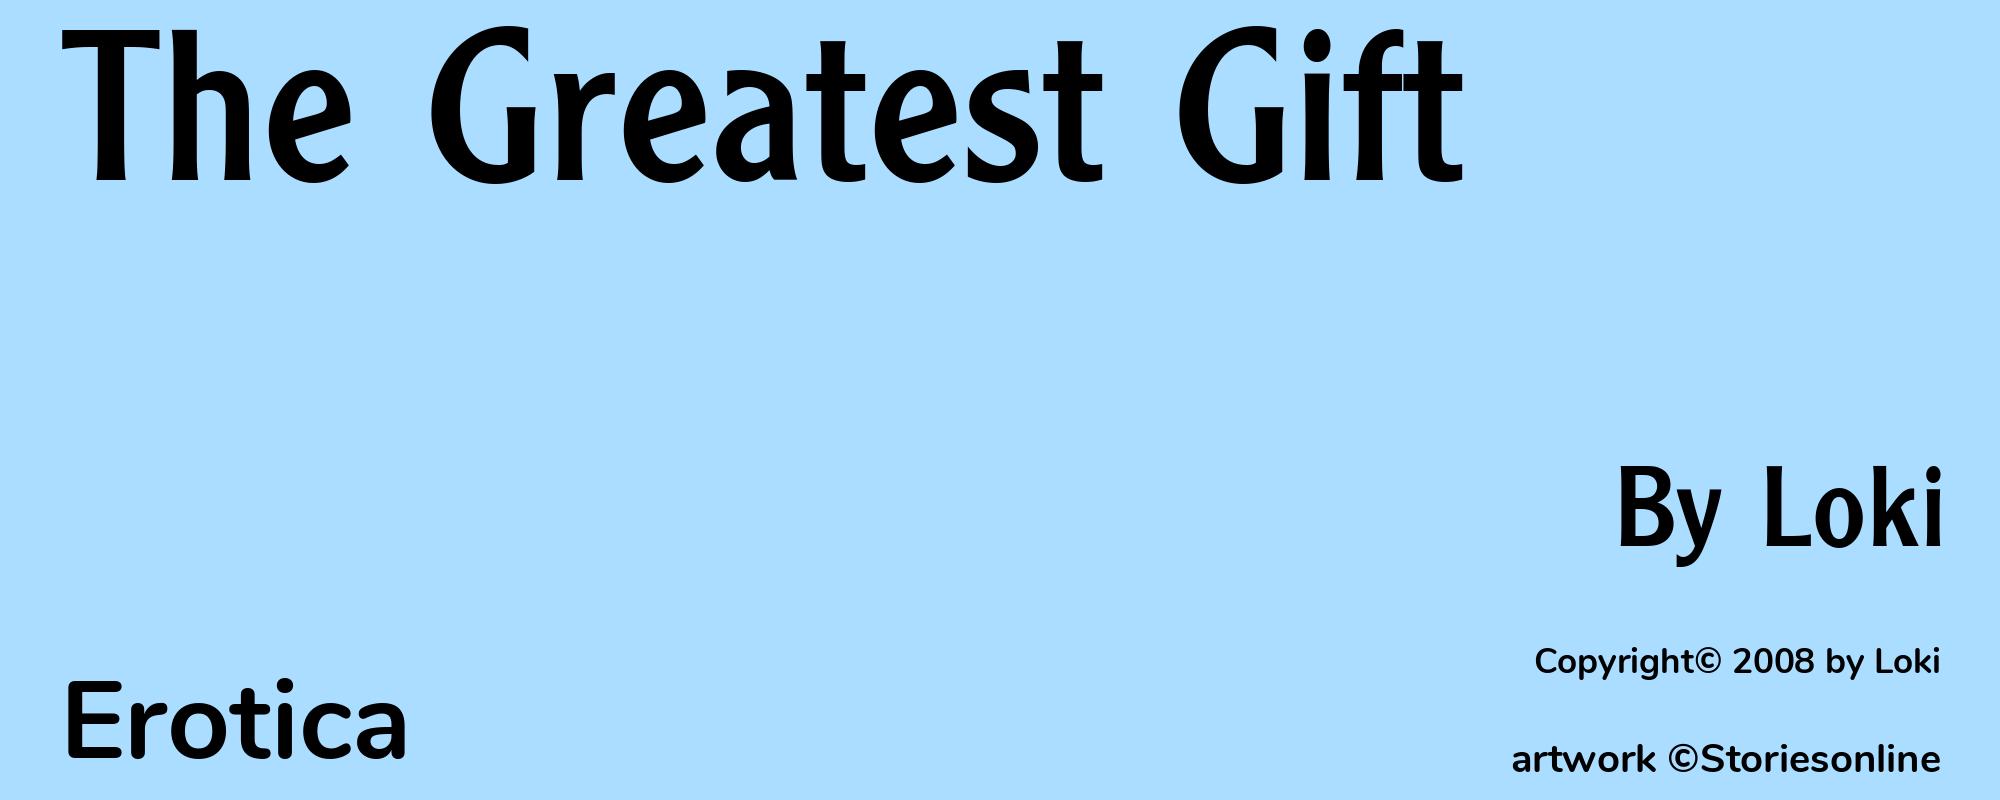 The Greatest Gift - Cover